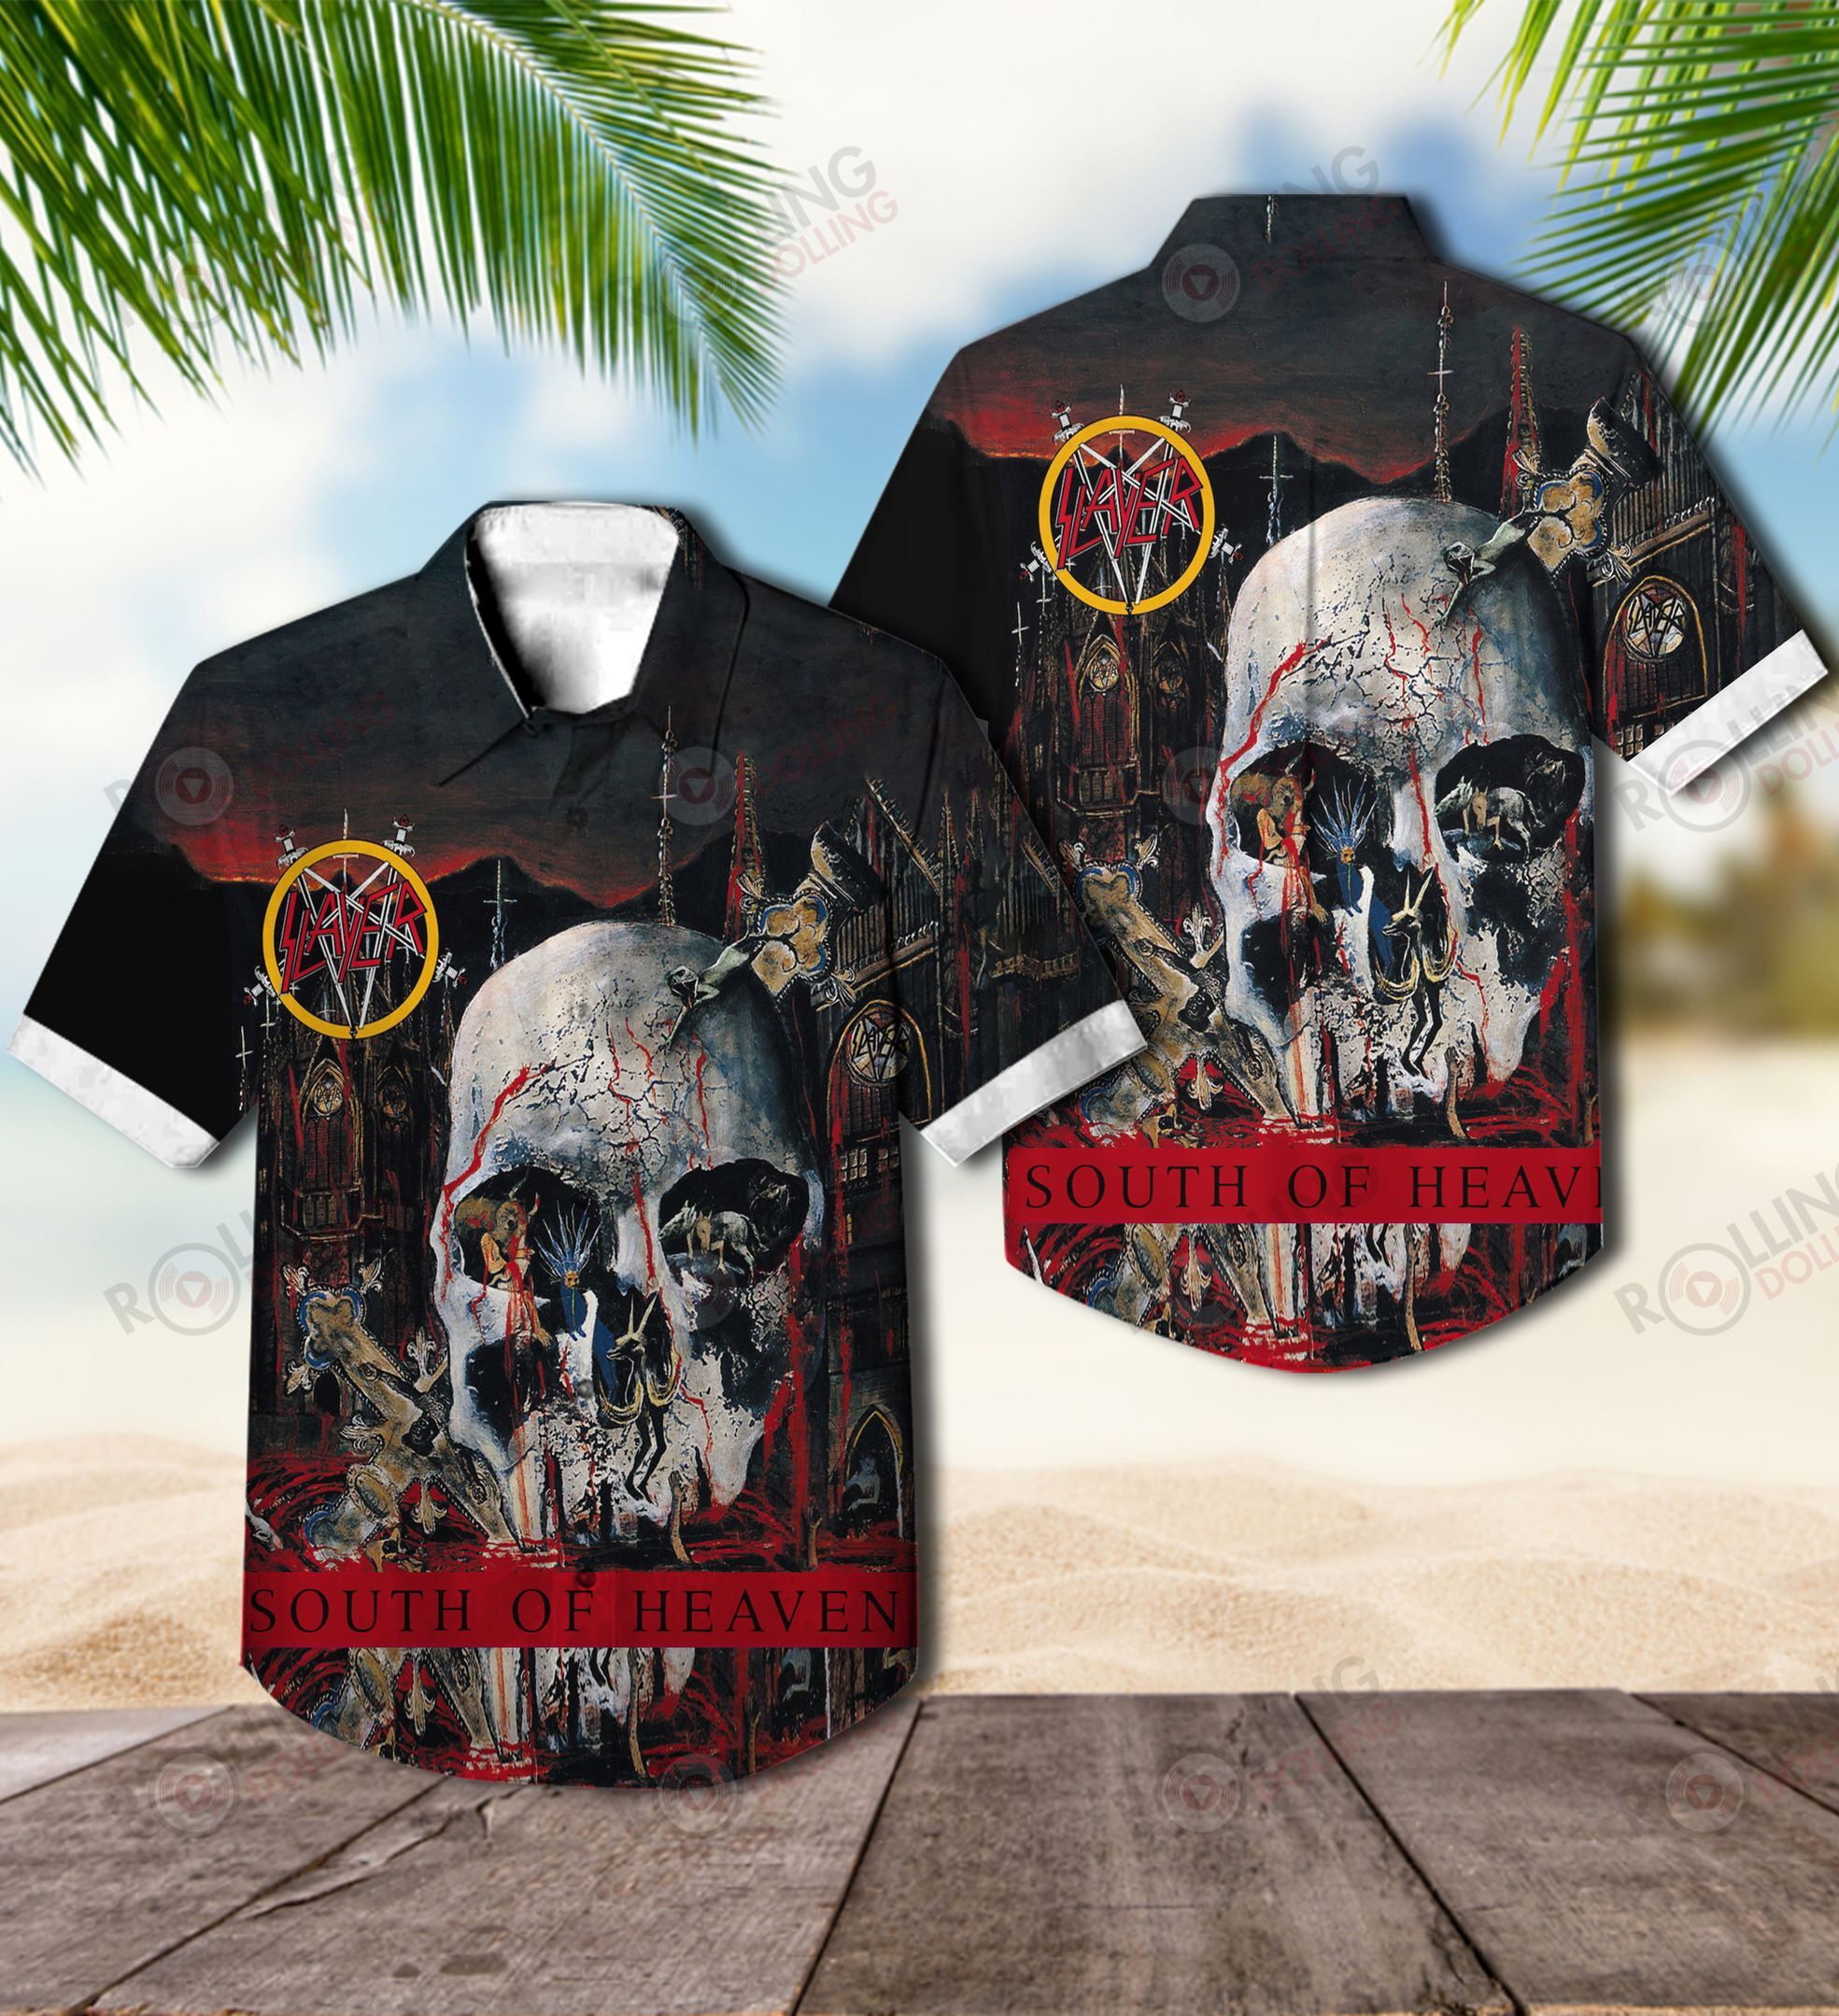 For summer, consider wearing This Amazing Hawaiian Shirt shirt in our store 137